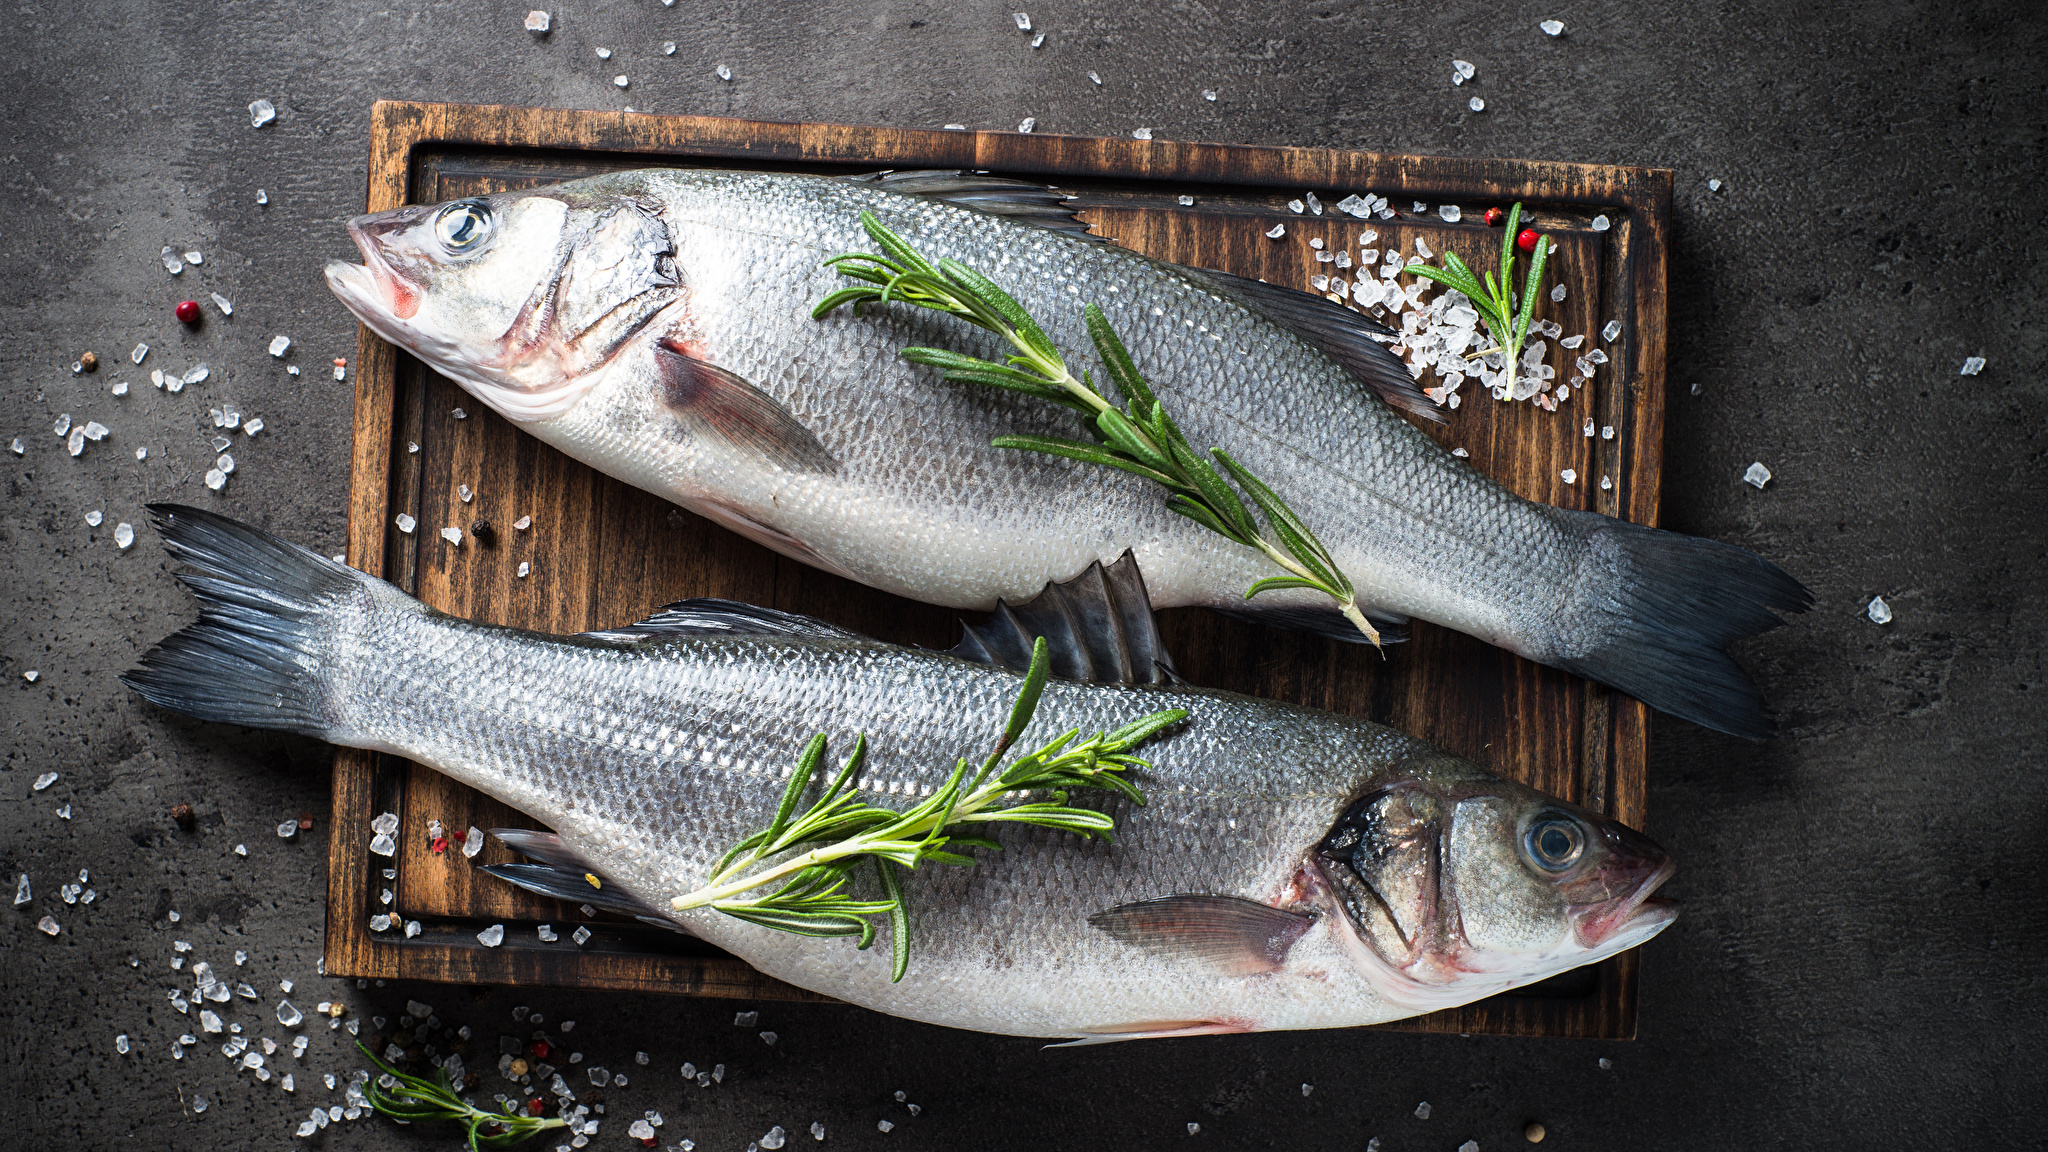 Should You Avoid Fish Because of Mercury?